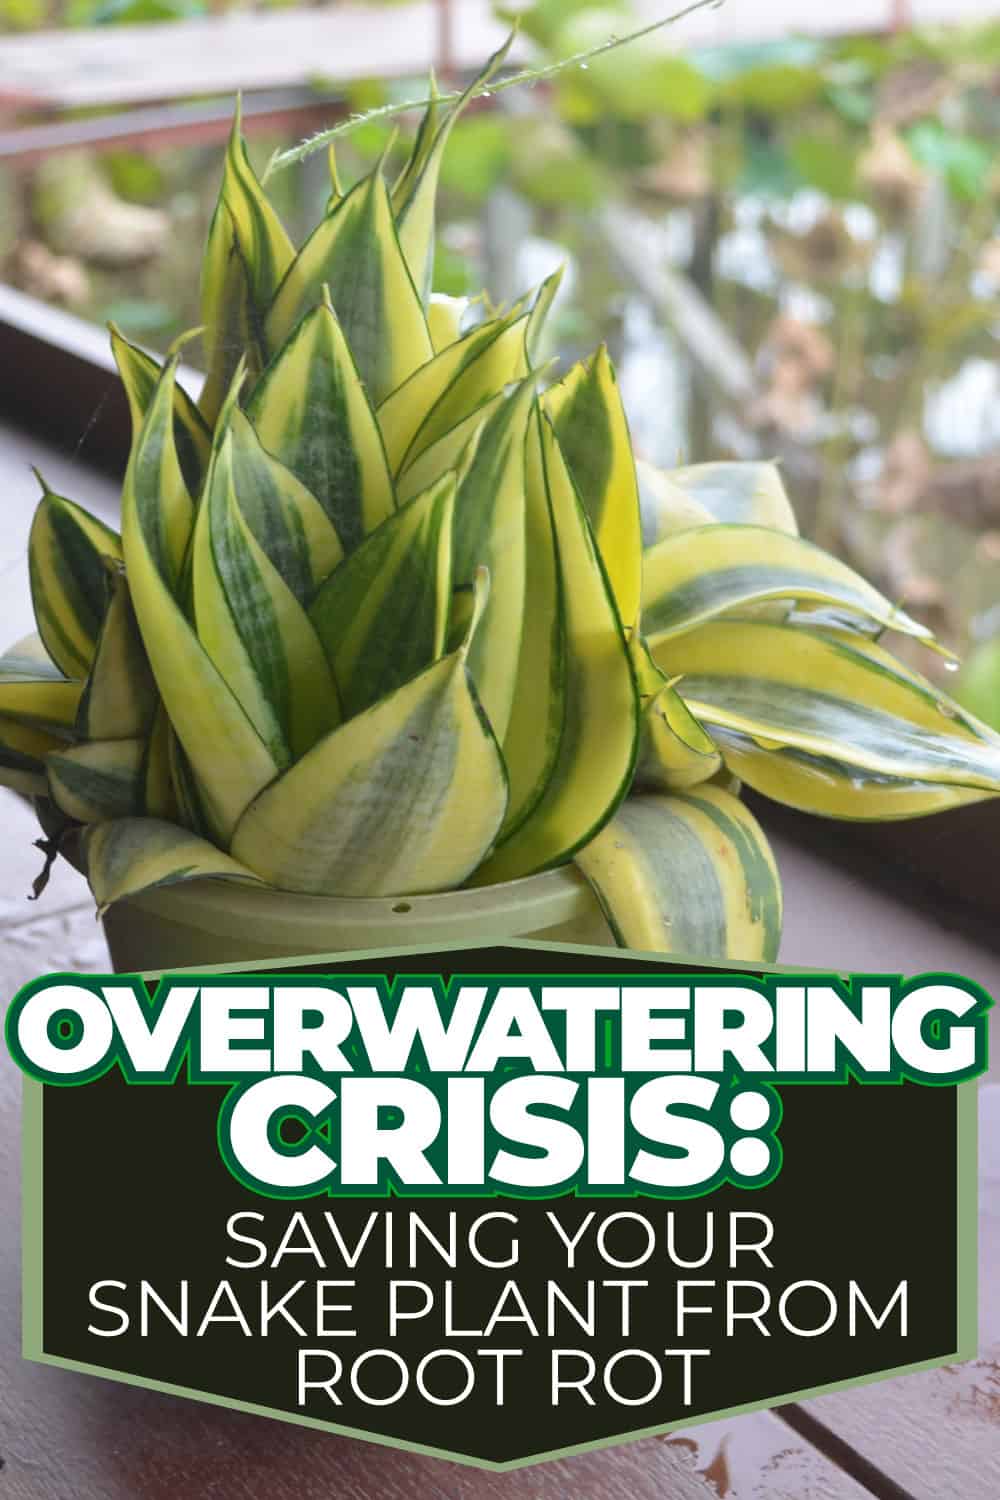 Overwatering Crisis: Saving Your Snake Plant from Root Rot